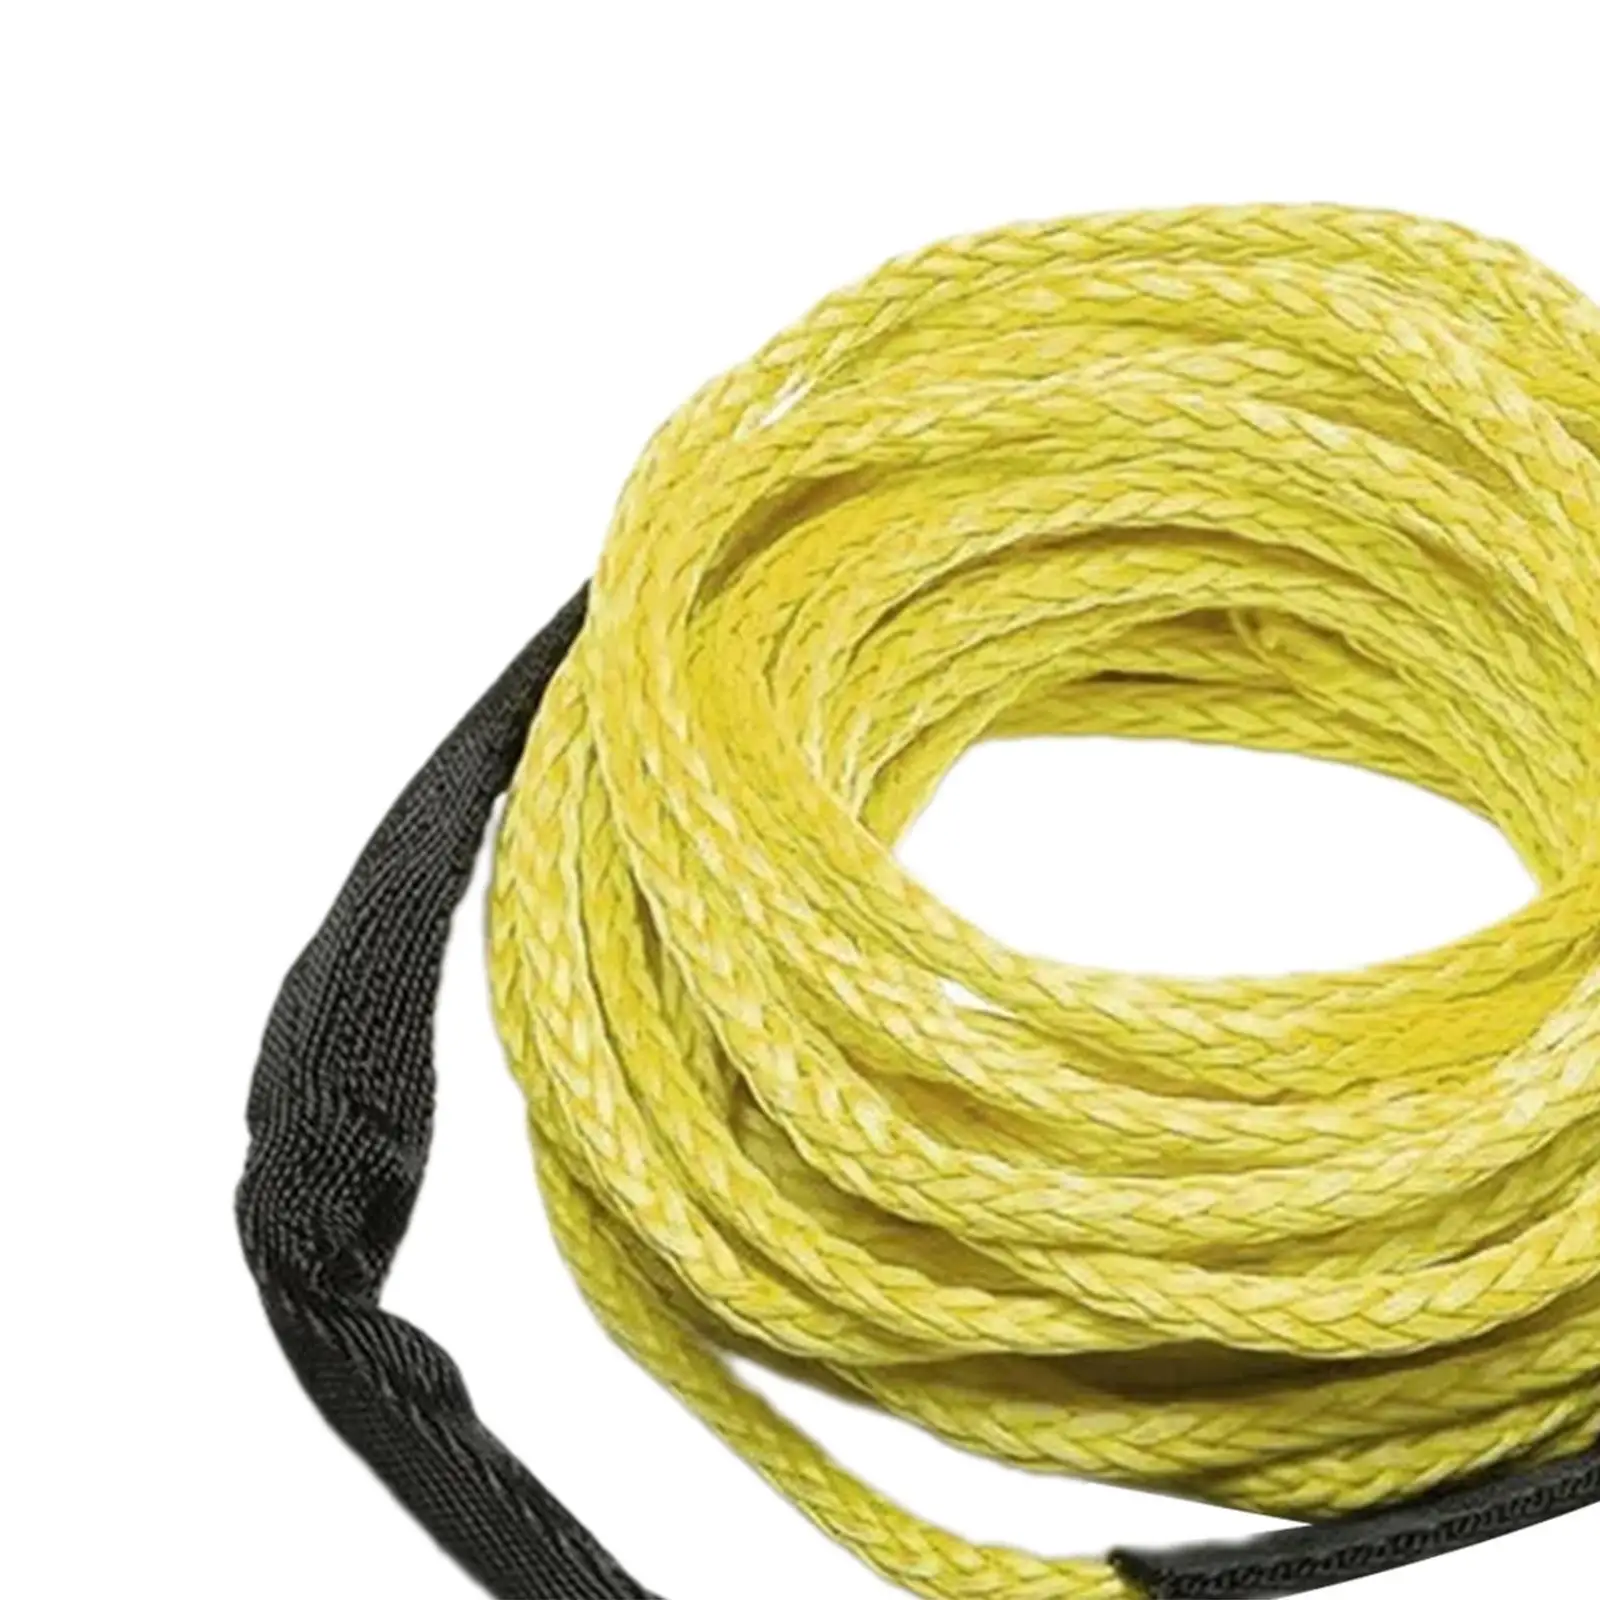 Synthetic Winch Rope Tow Rope 15M Heavy Duty Tow Strap 7700lbs Towing Rope Trailer Rope for Boat Car SUV UTV Accessories